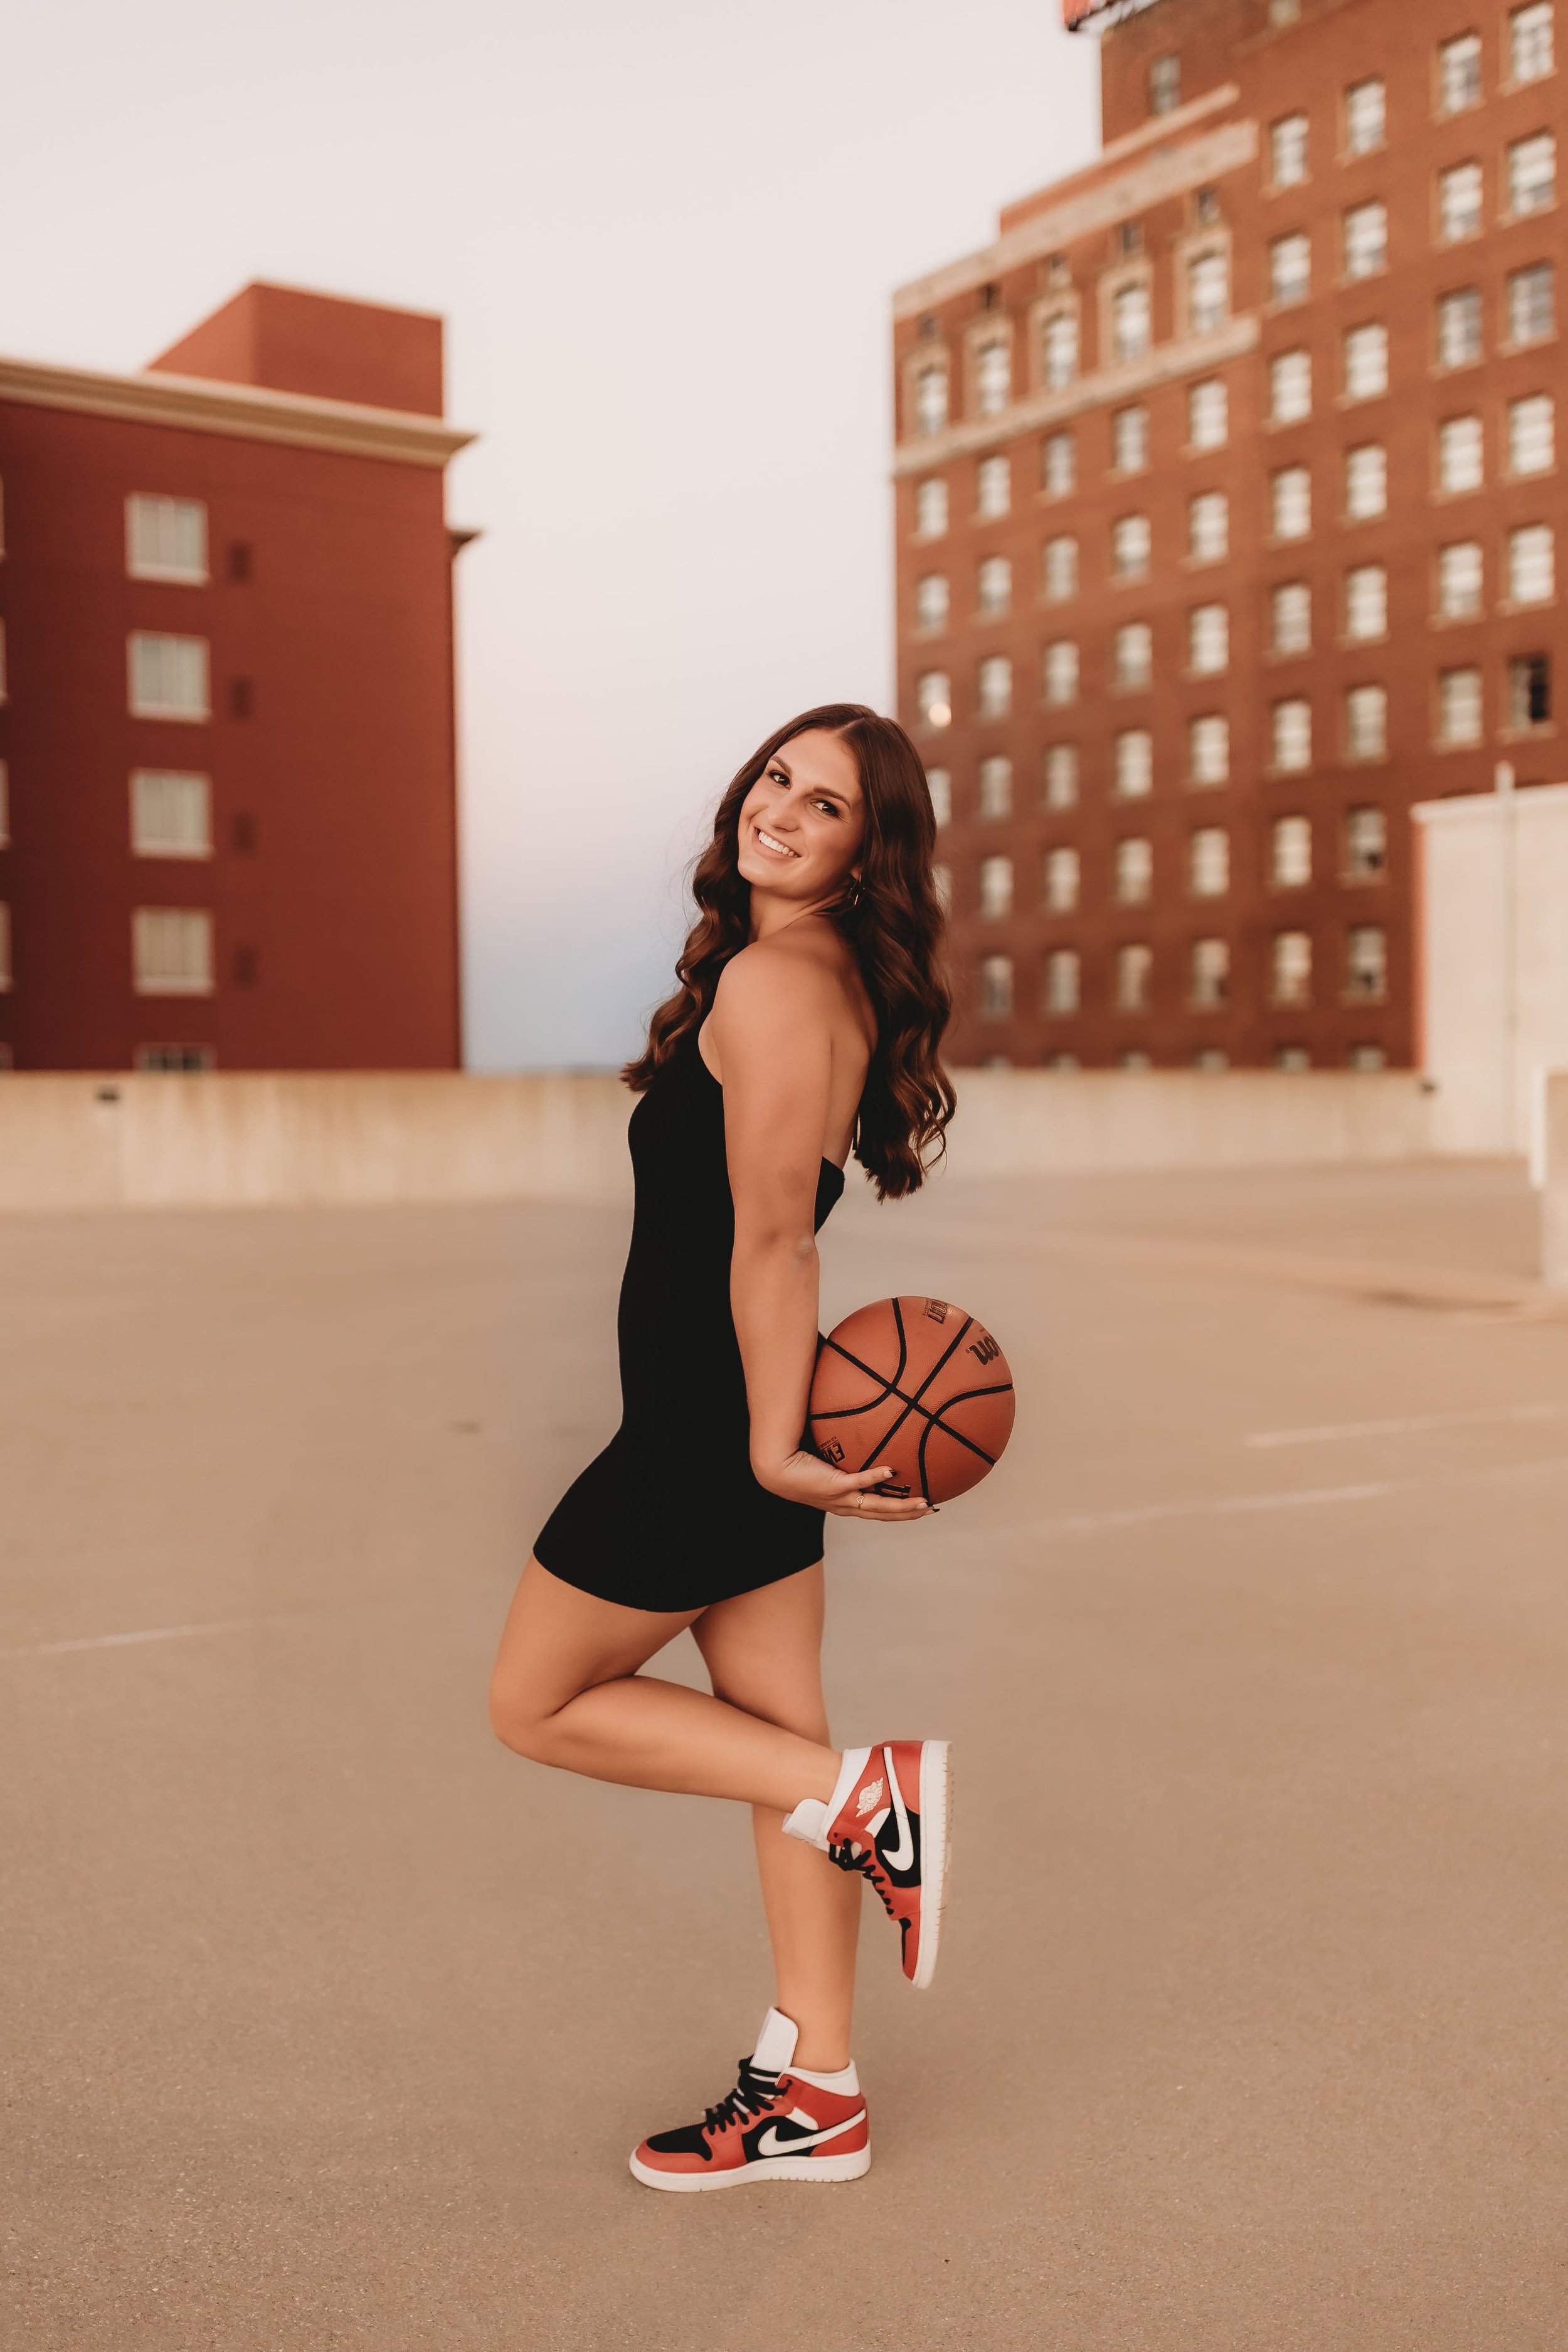  Senior basketball player for metamora stands on a peoria rooftop while holding a basketball smiling and posing for senior pictures basketball 